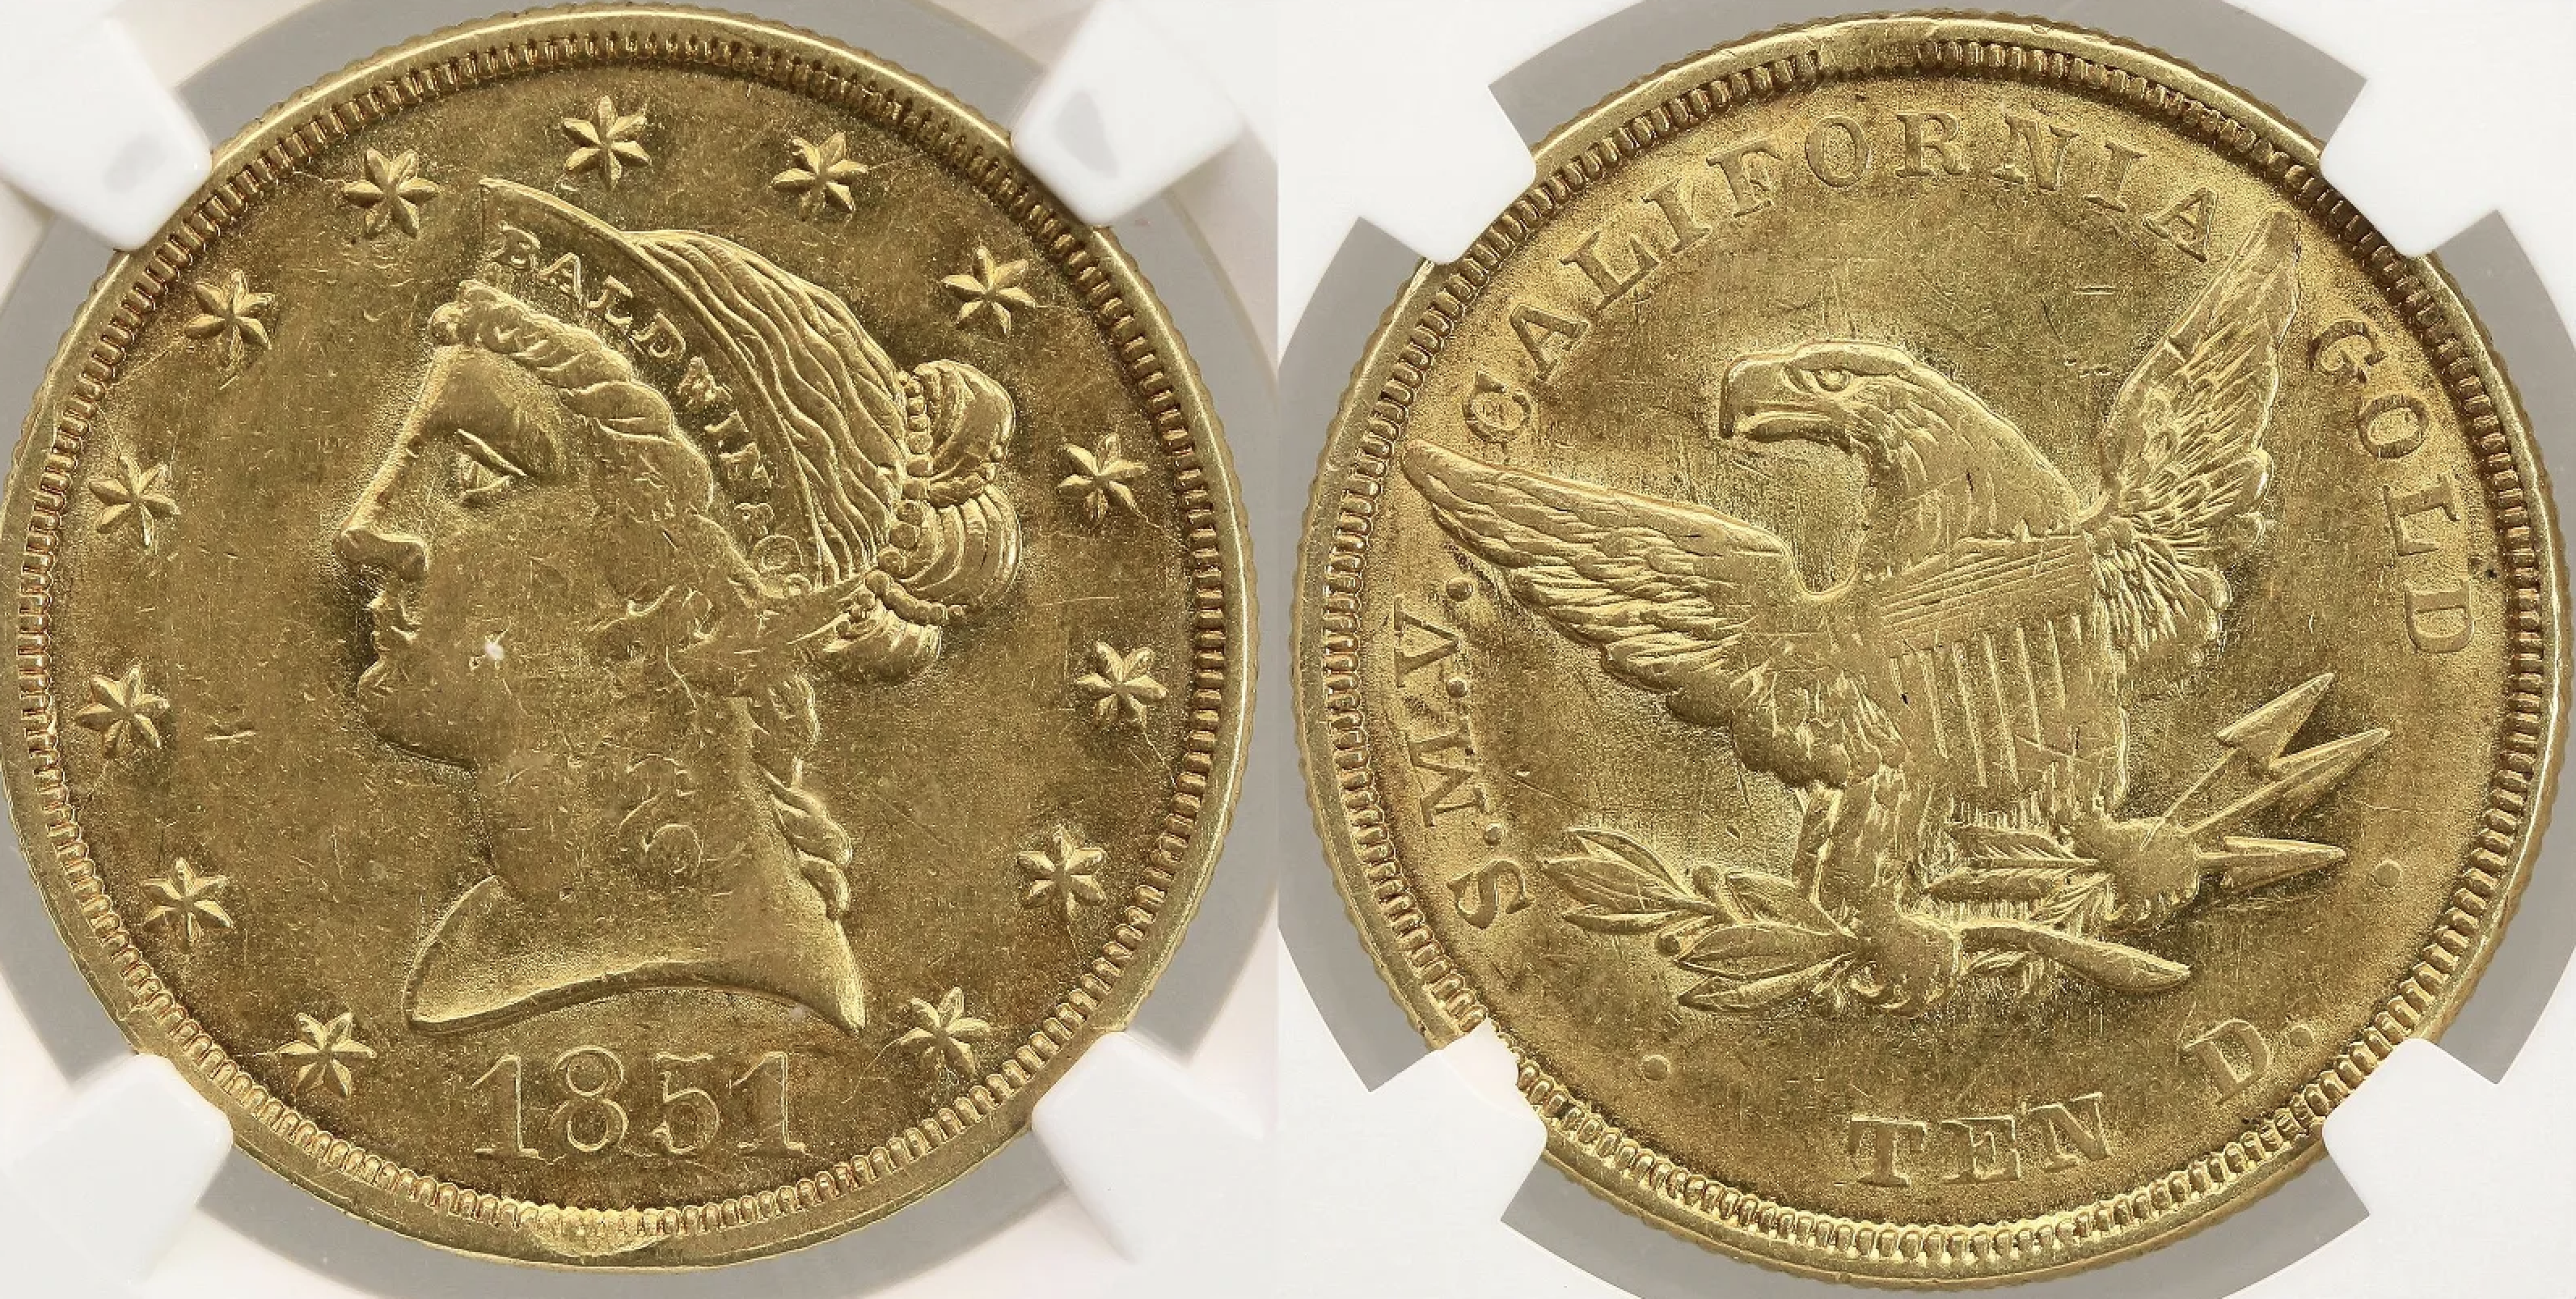 Baldwin 1851 $10 gold coin in mint state, one of very few known, estimated at $180,000-$250,000